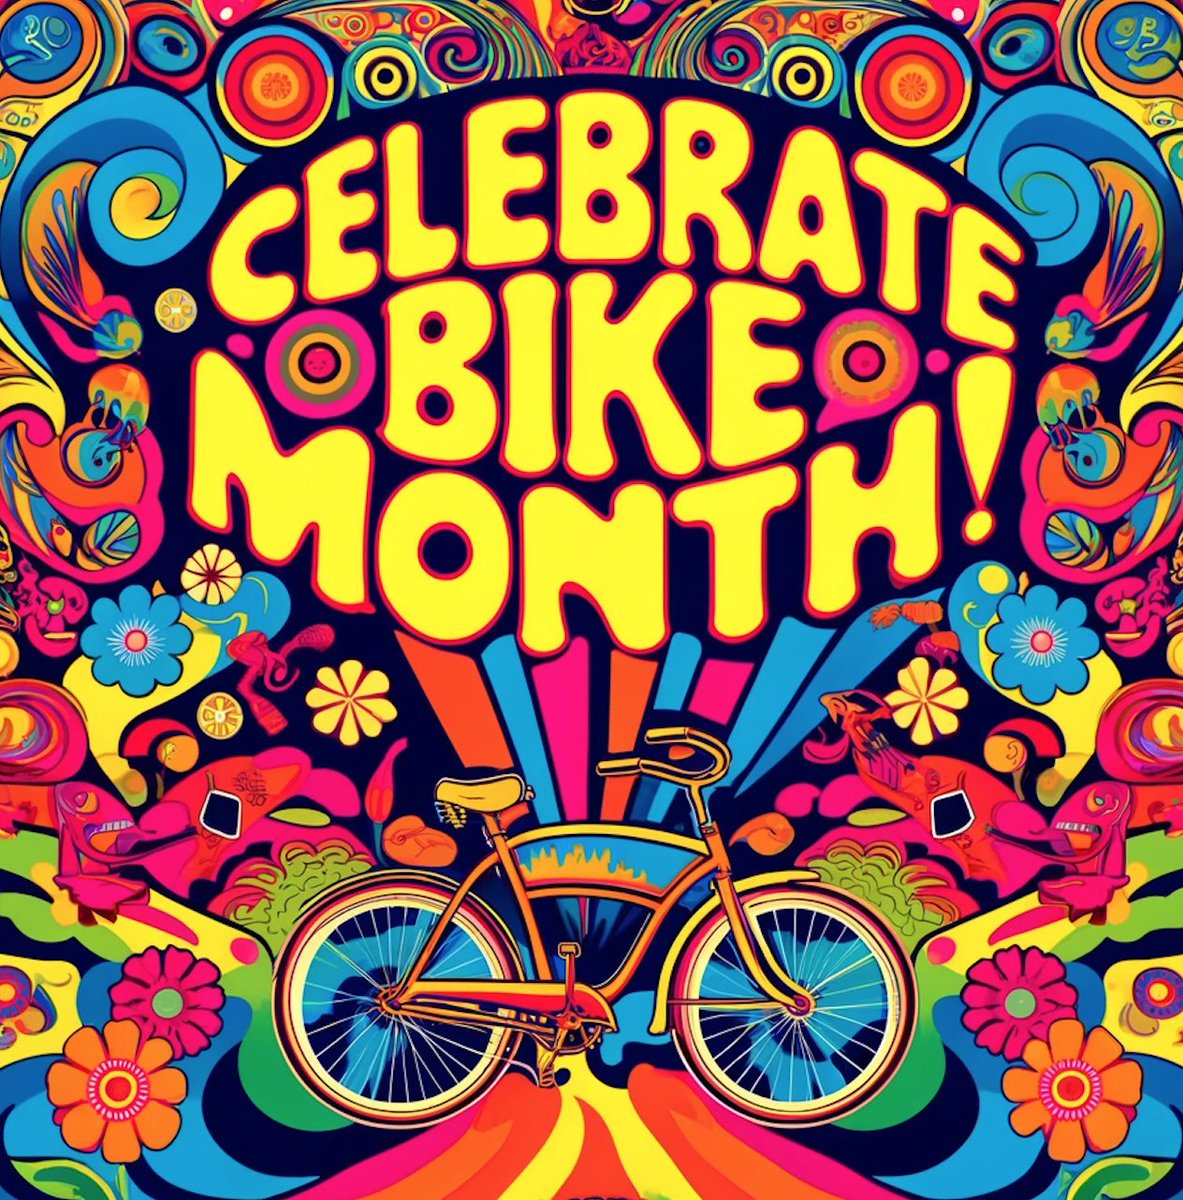 May is National Bike Month! Dust off your bike & join the fun! Go biking, volunteer at local events, or support bike advocacy groups. Do your bit with Bike to Work Day & Bike and Roll to School Day events. Let's ride towards a greener future! wp.me/pavEZK-1qD